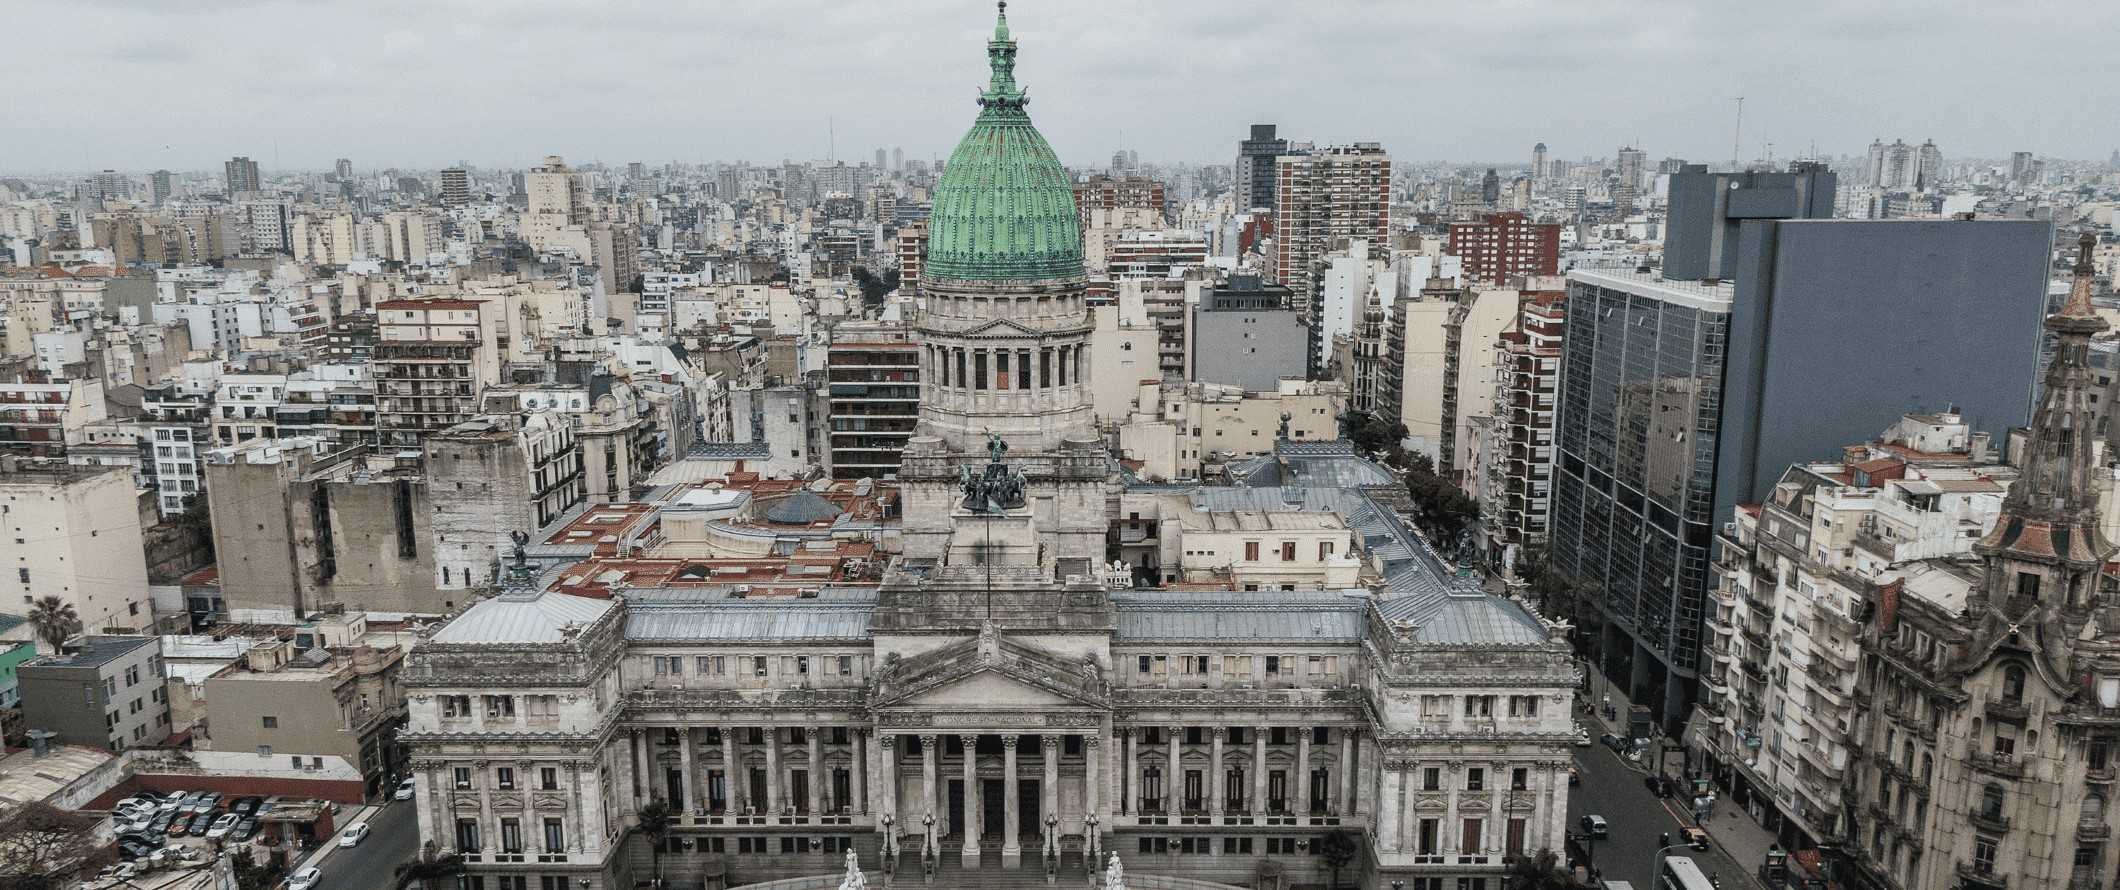 Skyline of Buenos Aires, Argentina